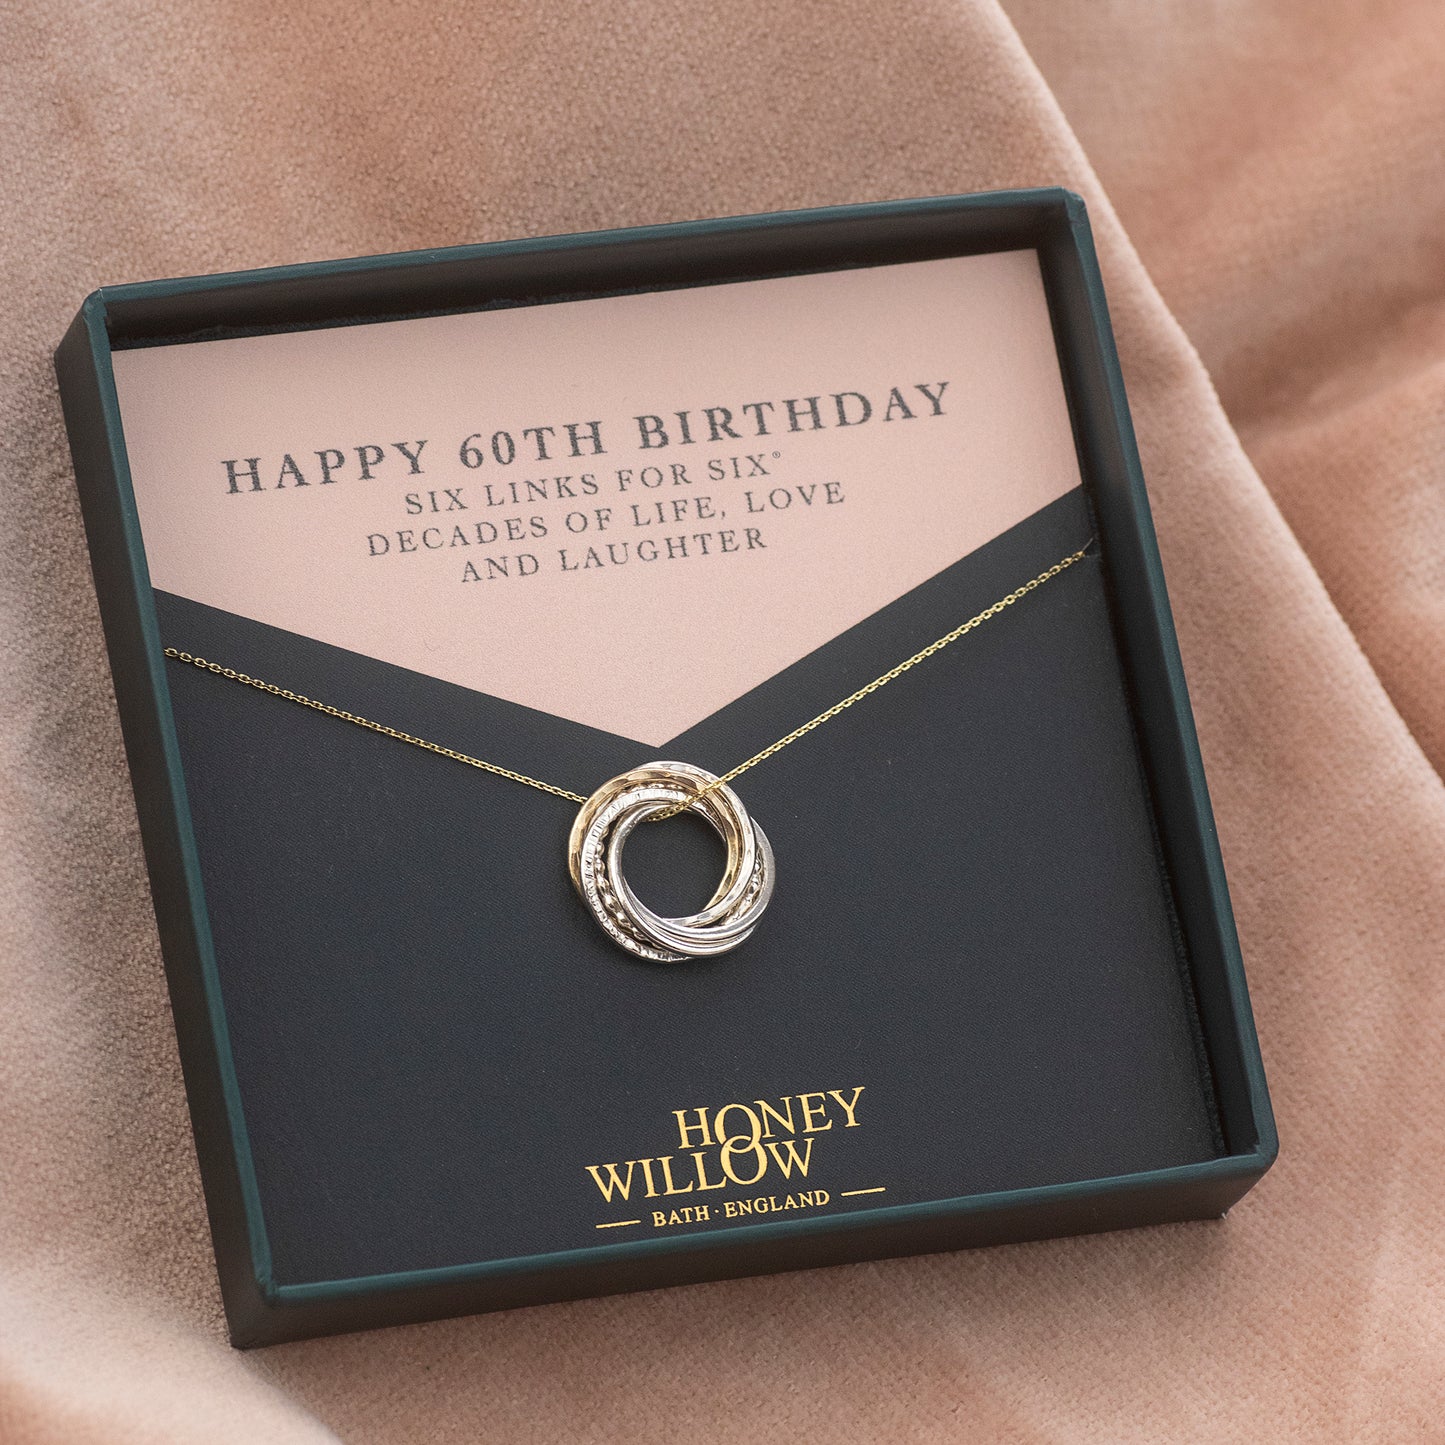 60th Birthday Necklace - Silver & 9kt Gold - The Original 6 Links for 6 Decades Necklace